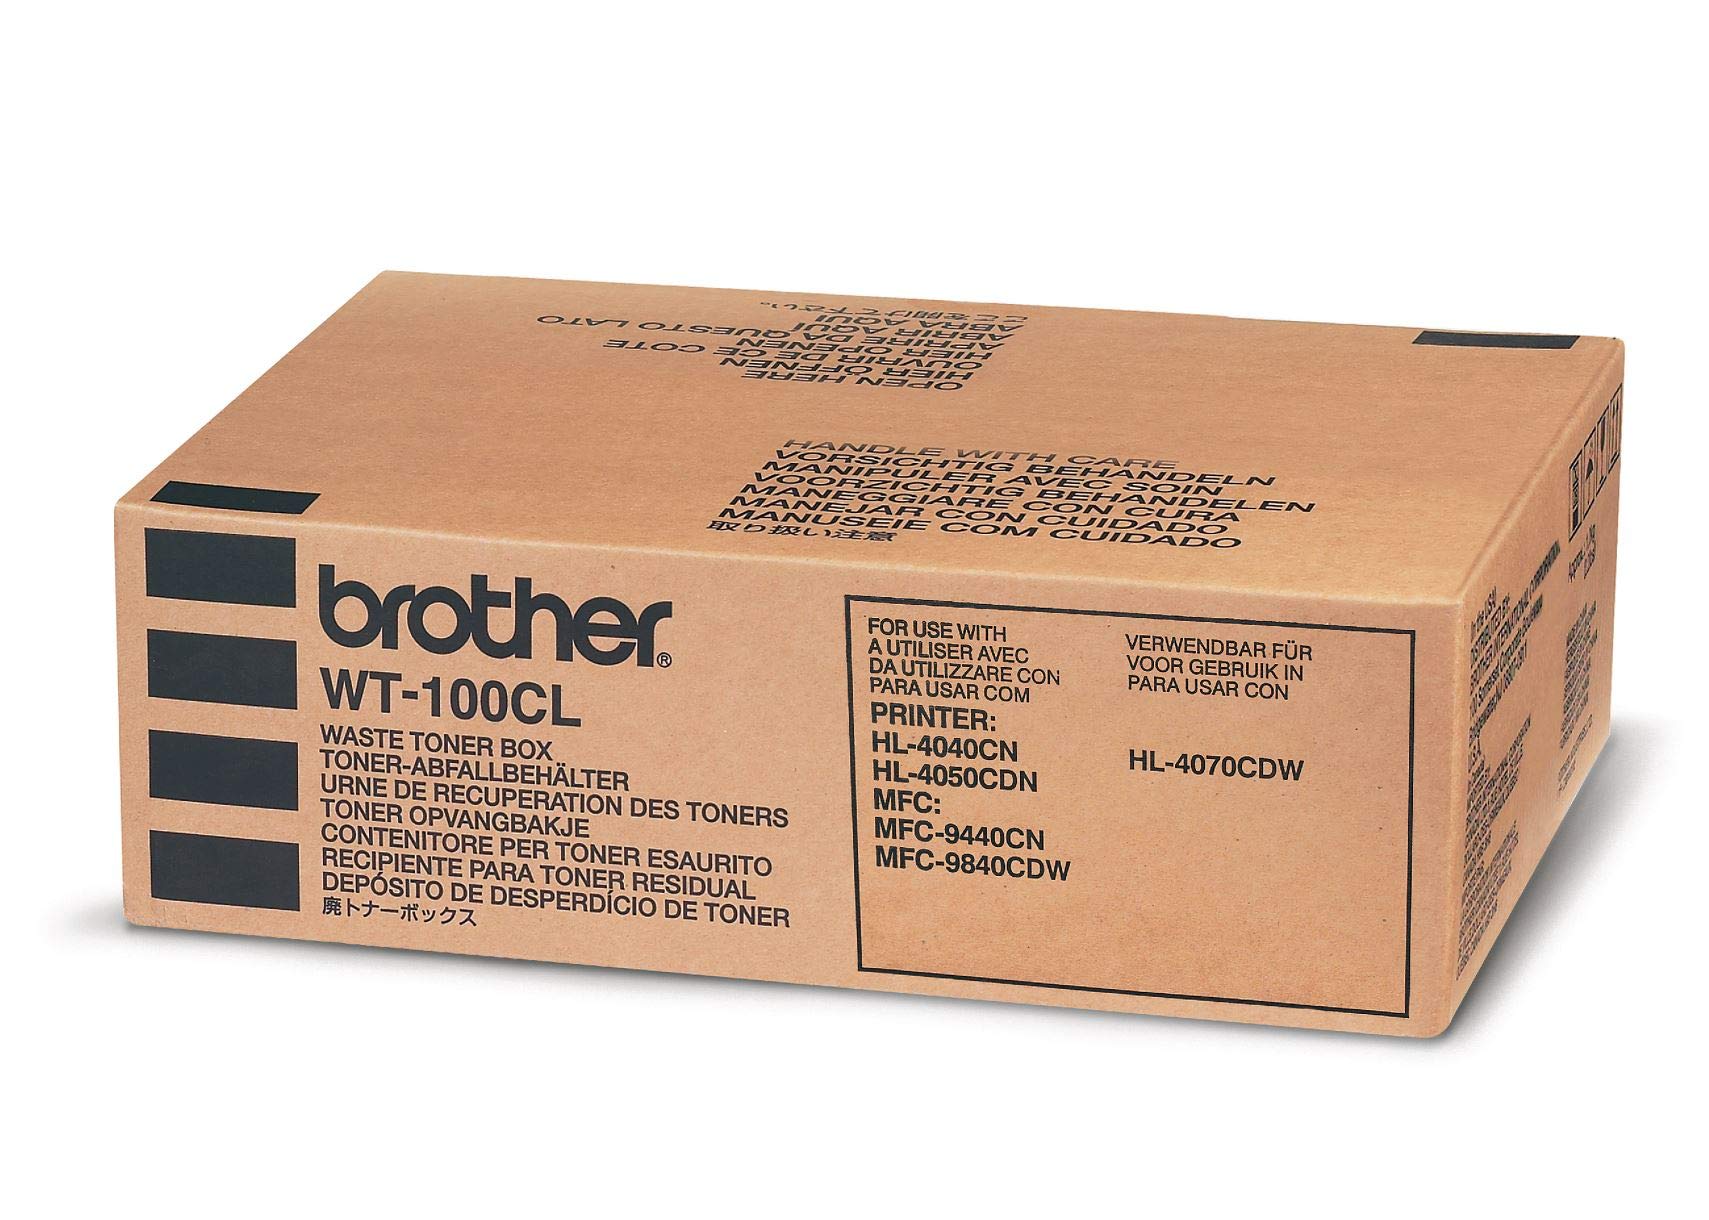 Brother WT100CL MFC-9440CN 1 Waster Toner Pack Printer Accessory, BLACK